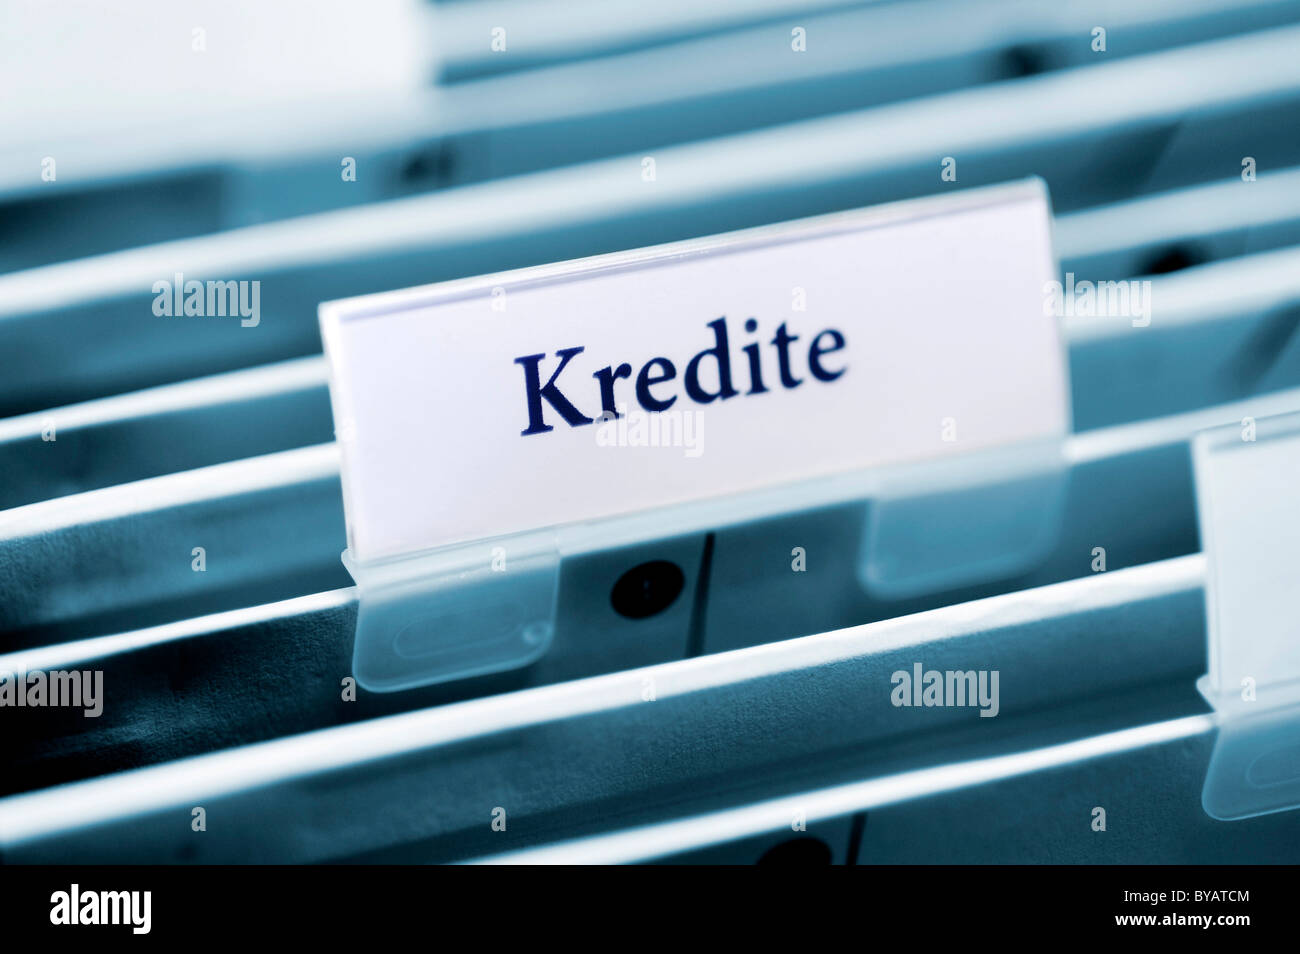 Rider on a hanging folder labeled Kredite or loans Stock Photo